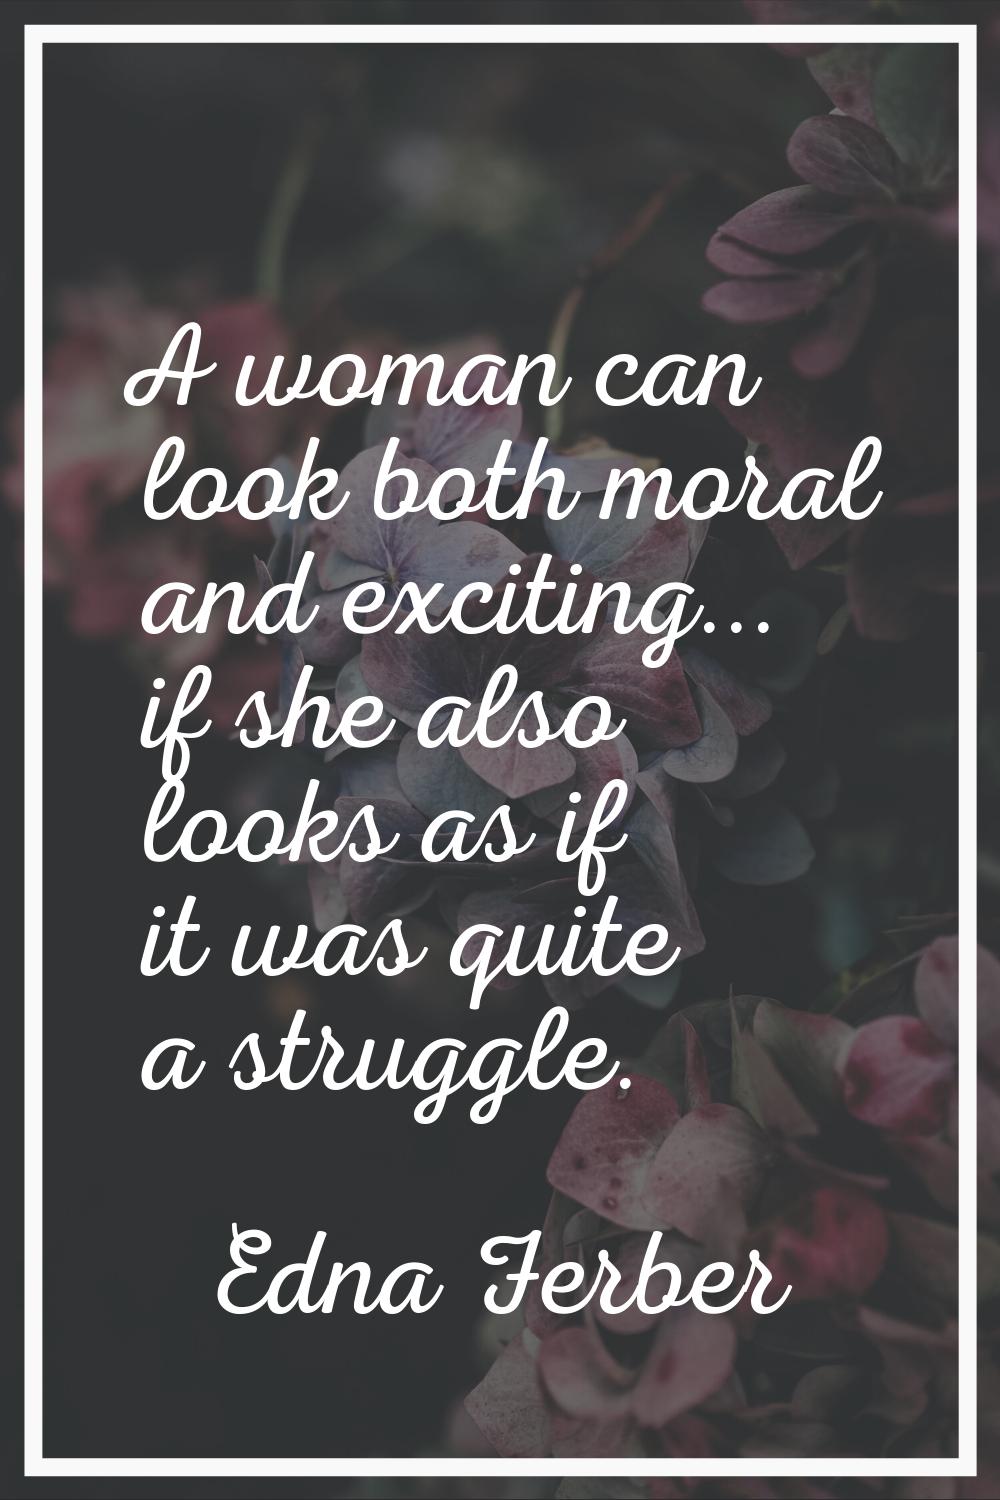 A woman can look both moral and exciting... if she also looks as if it was quite a struggle.